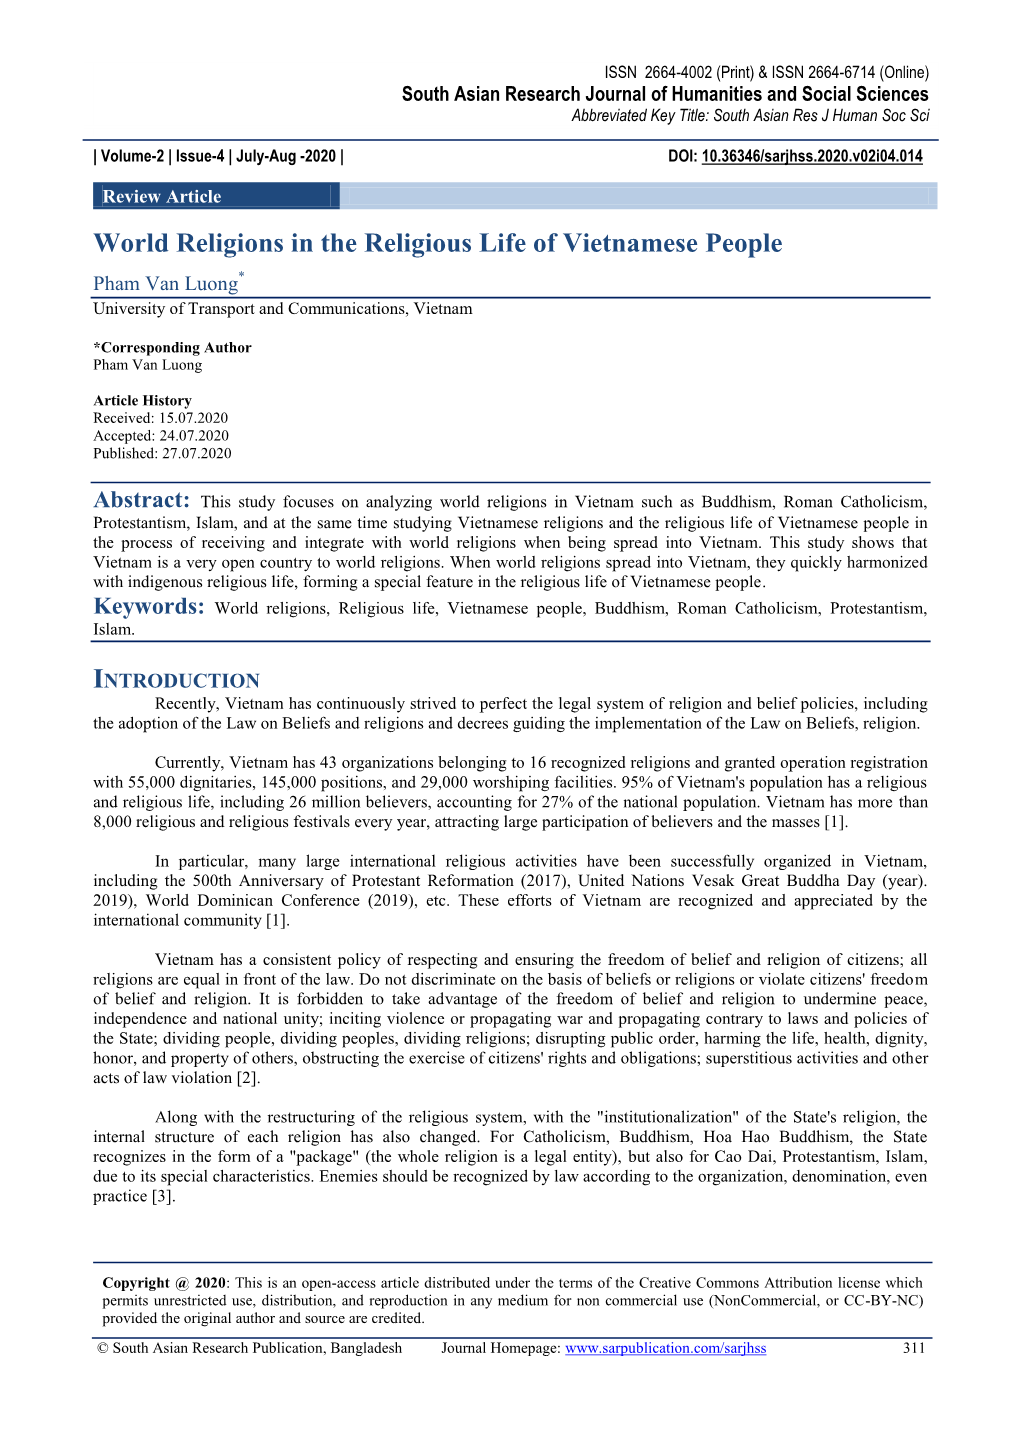 World Religions in the Religious Life of Vietnamese People